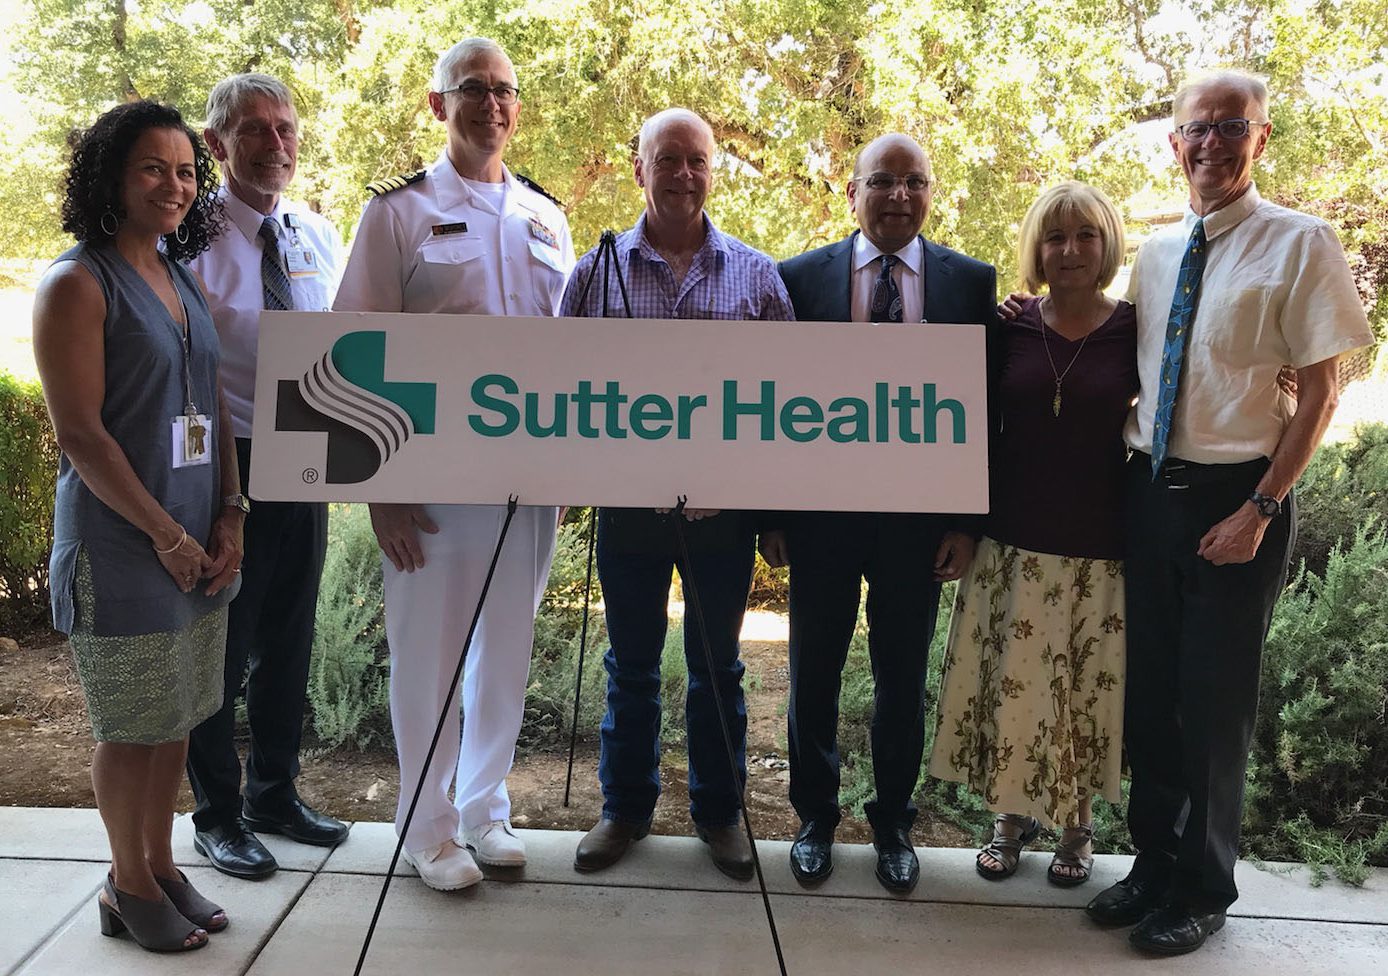 The Sutter Rural Residency Program received a U.S. grant last year and this week was accredited and is ready to screen applicants. Leaders involved in the program include, from left, Dineen Greer, M.D., program director of the Sutter Family Medicine Residency Program; Sutter Amador Hospital CEO Tom Dickson; HRSA regional administrator Capt. John Moroney, M.D; Jackson Mayor Robert Stimpson; Sutter Valley Area Chief Medical Officer Ash Gokli, M.D.; former Sutter Amador CEO Anne Platt; and Robert Hartmann, M.D., longtime Amador County internal medicine physician and an instructor in the Rural Residency Program.